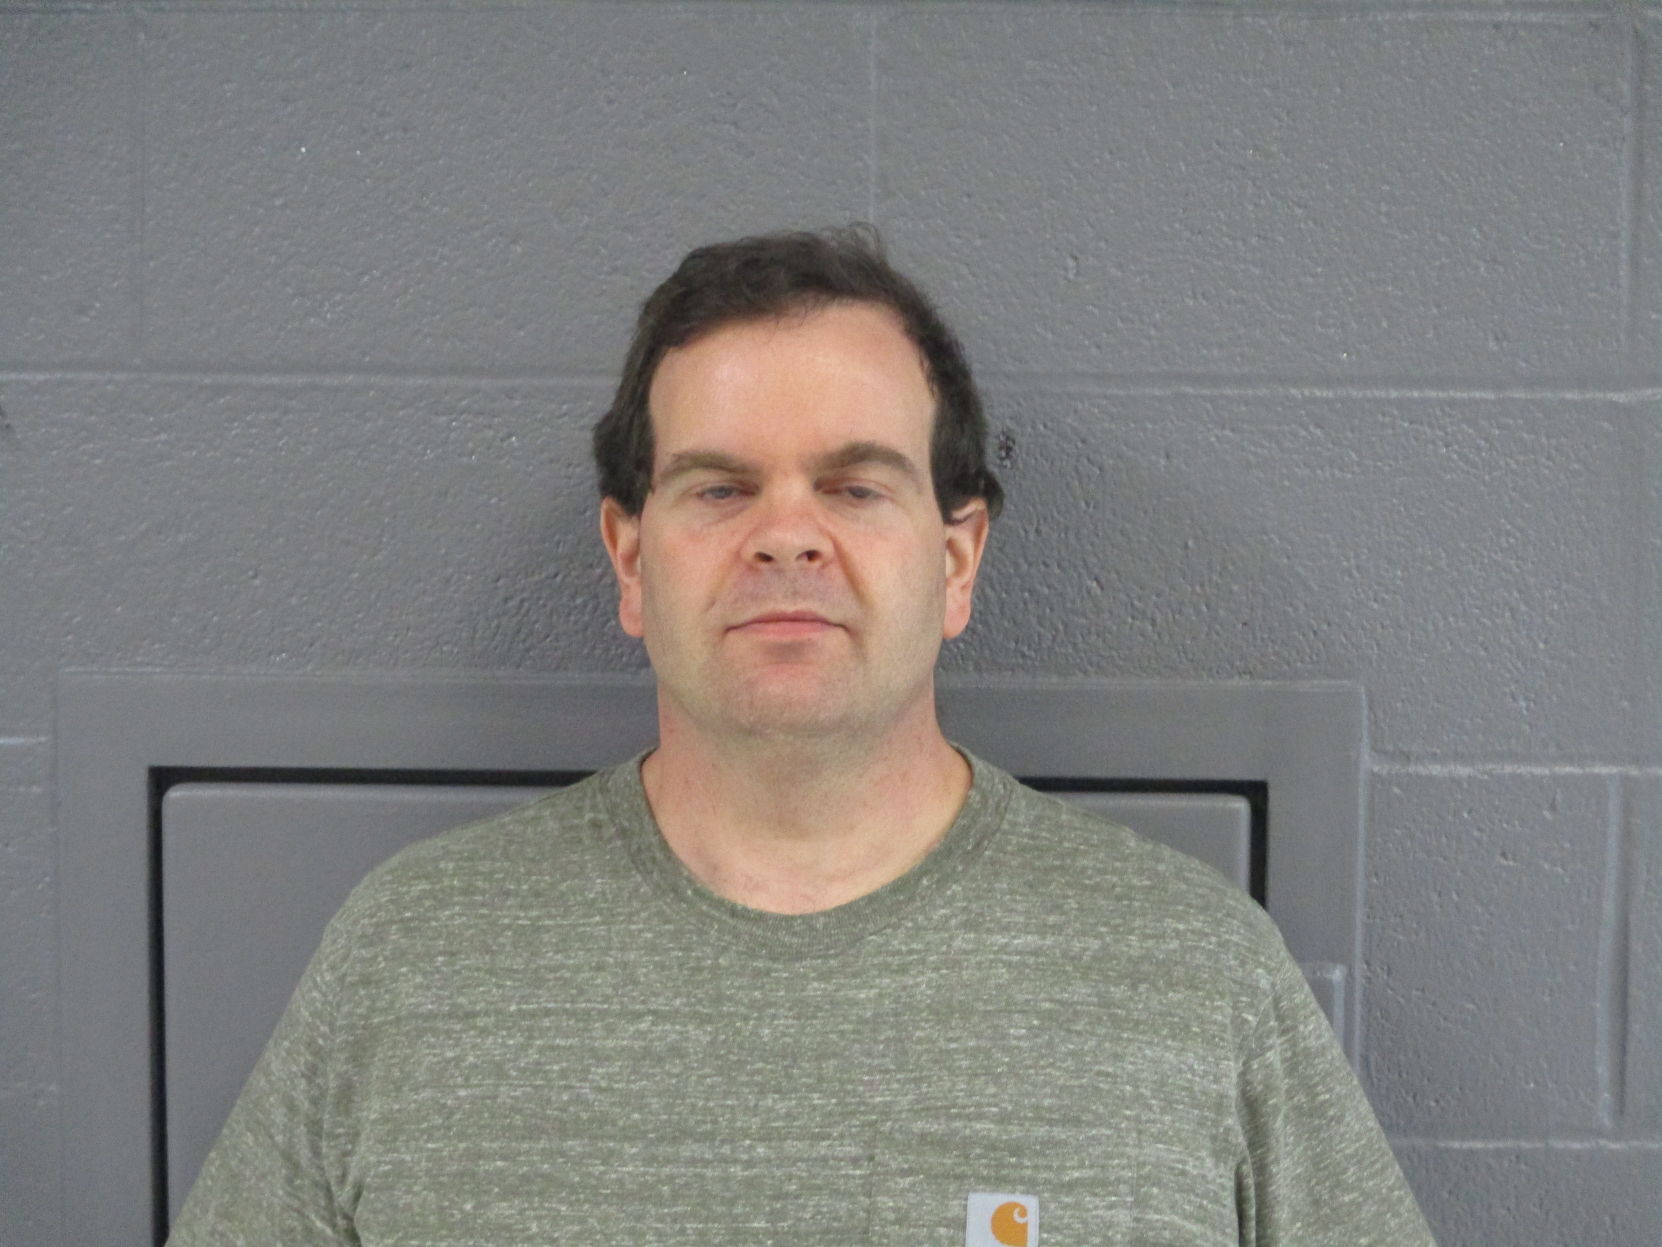 Bruceton Mills man charged with more than 300 counts of soliciting minors Preston County News wvnews